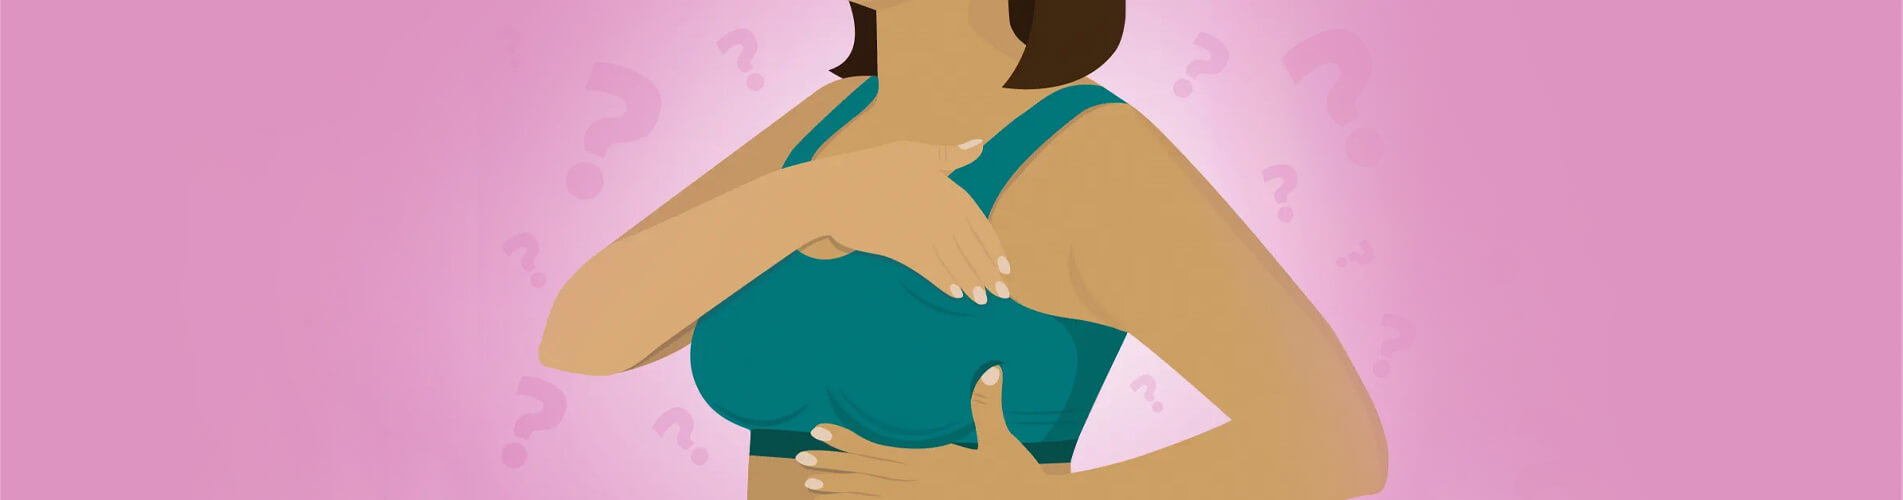 Breast Cancer - Types, Symptoms, Causes, and More!